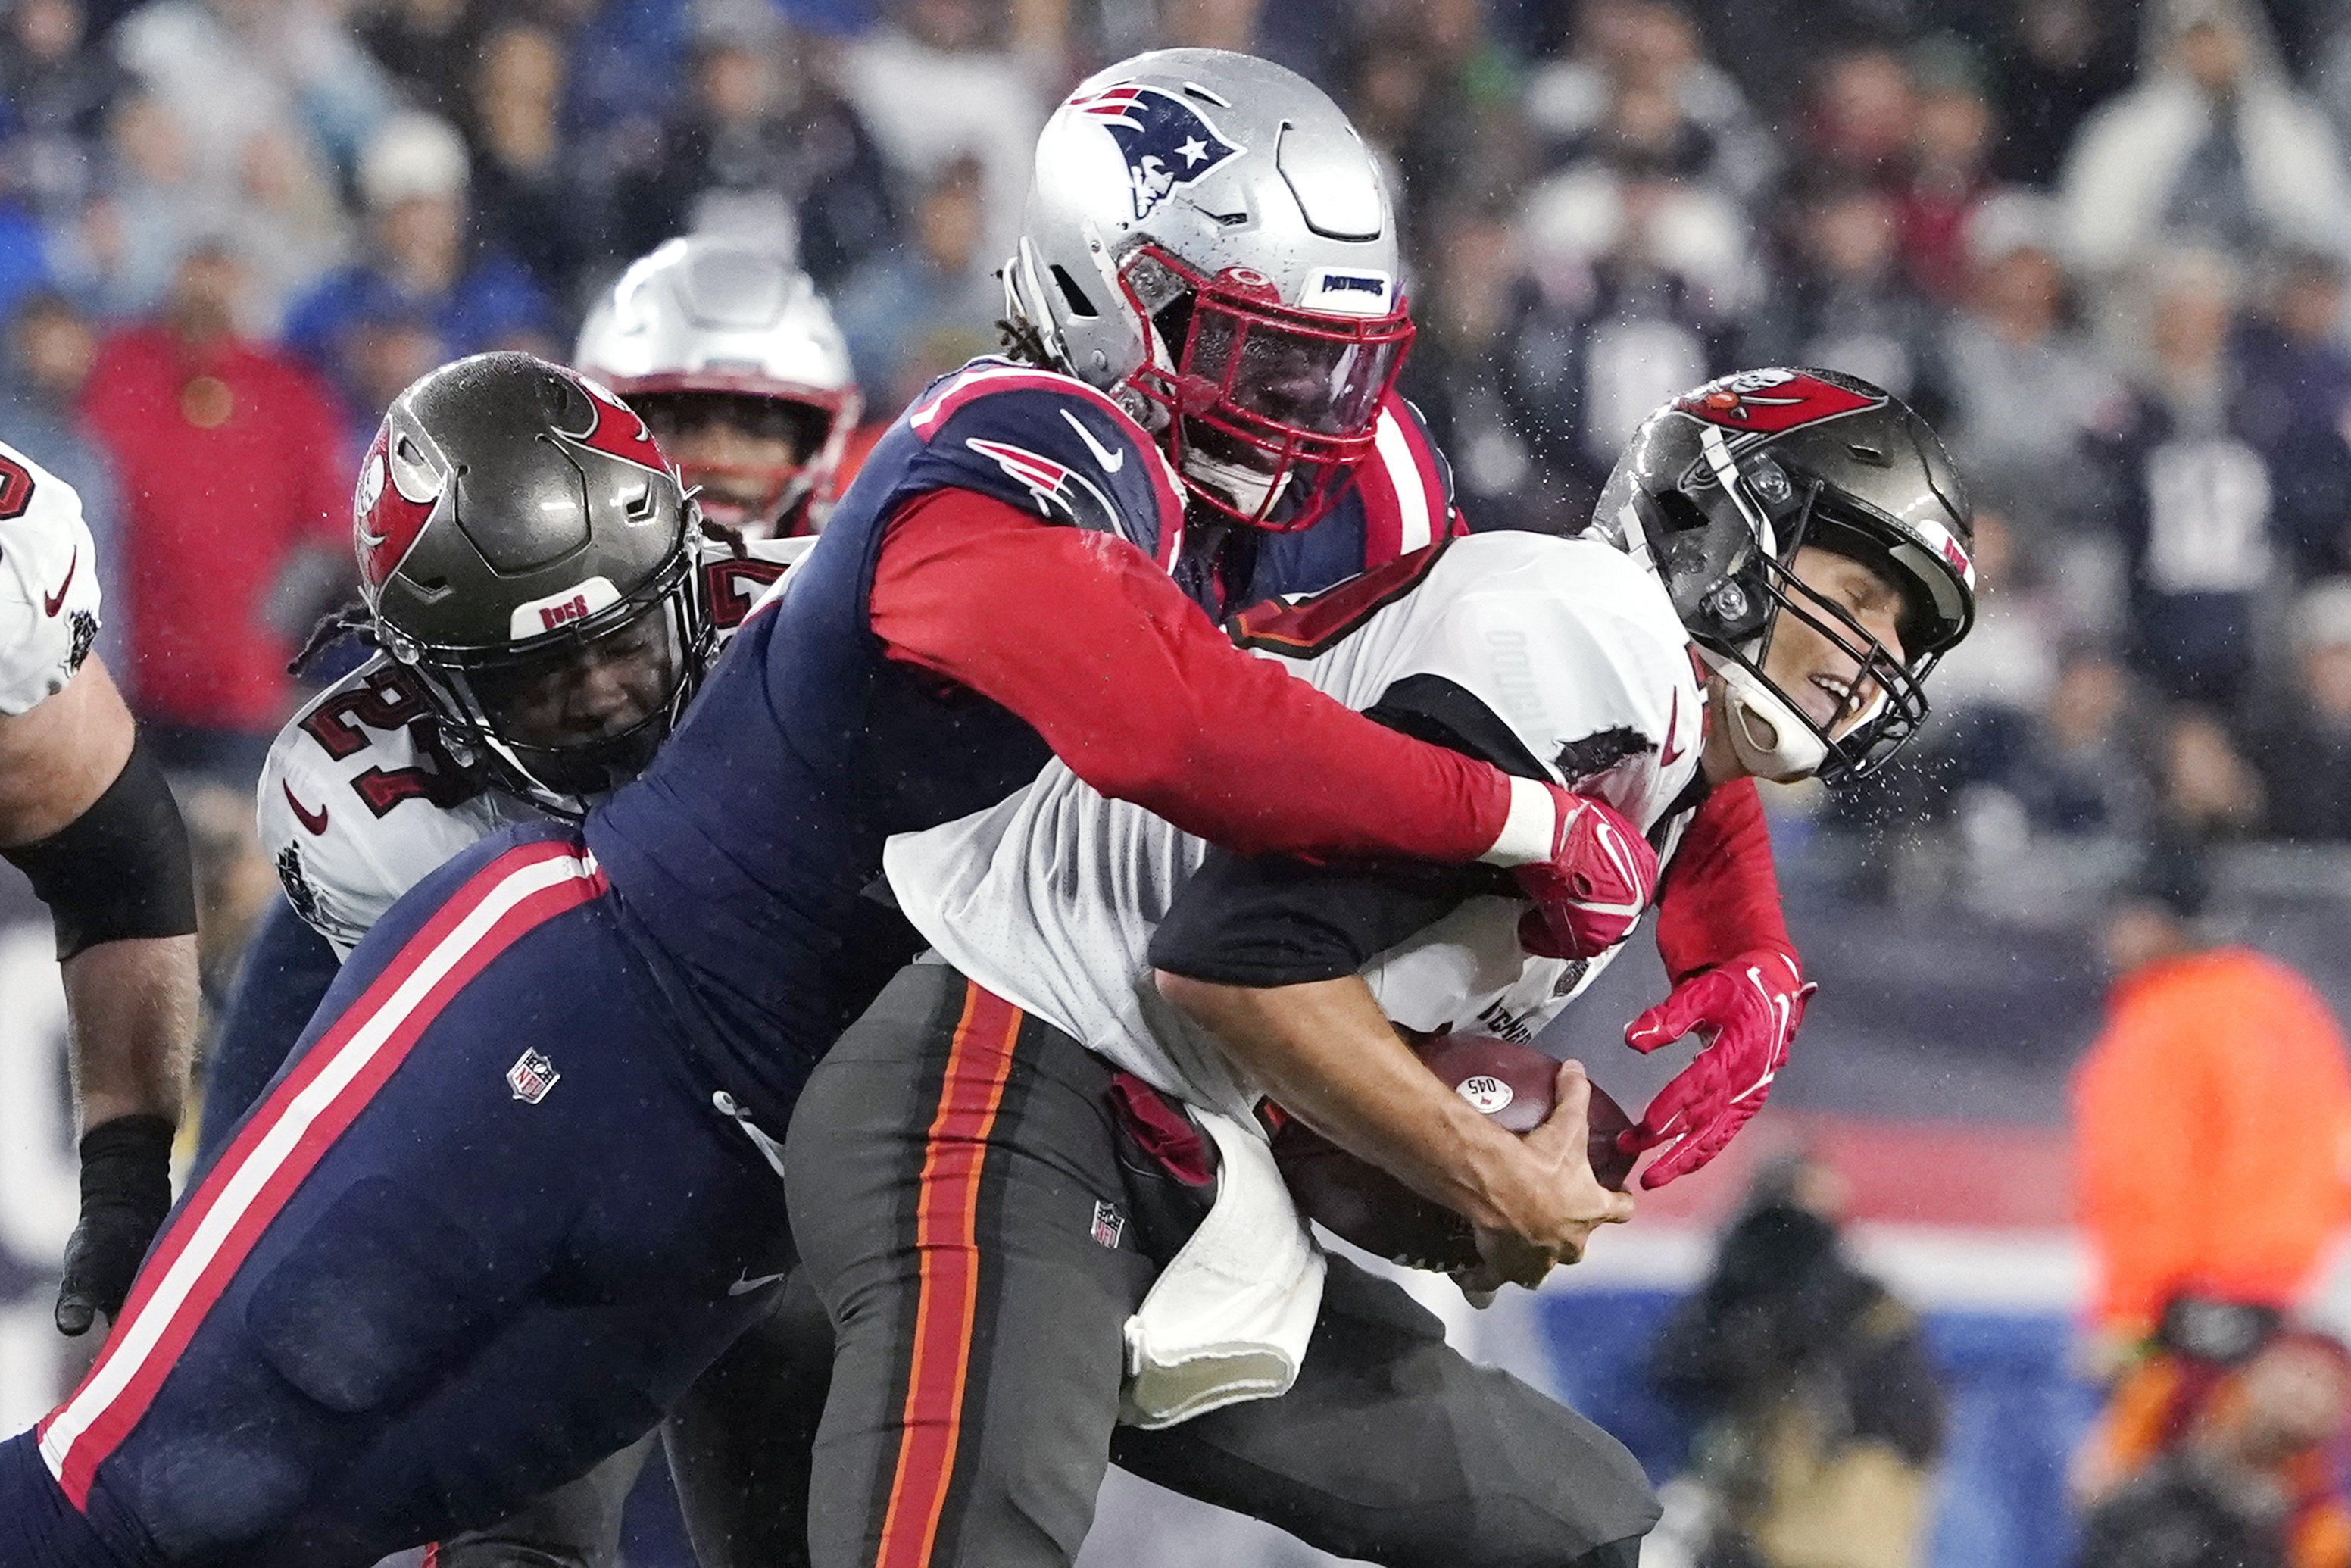 Patriots Matthew Judon carrying a little extra on signature red sleeves after birth of daughter, Azayda Joy